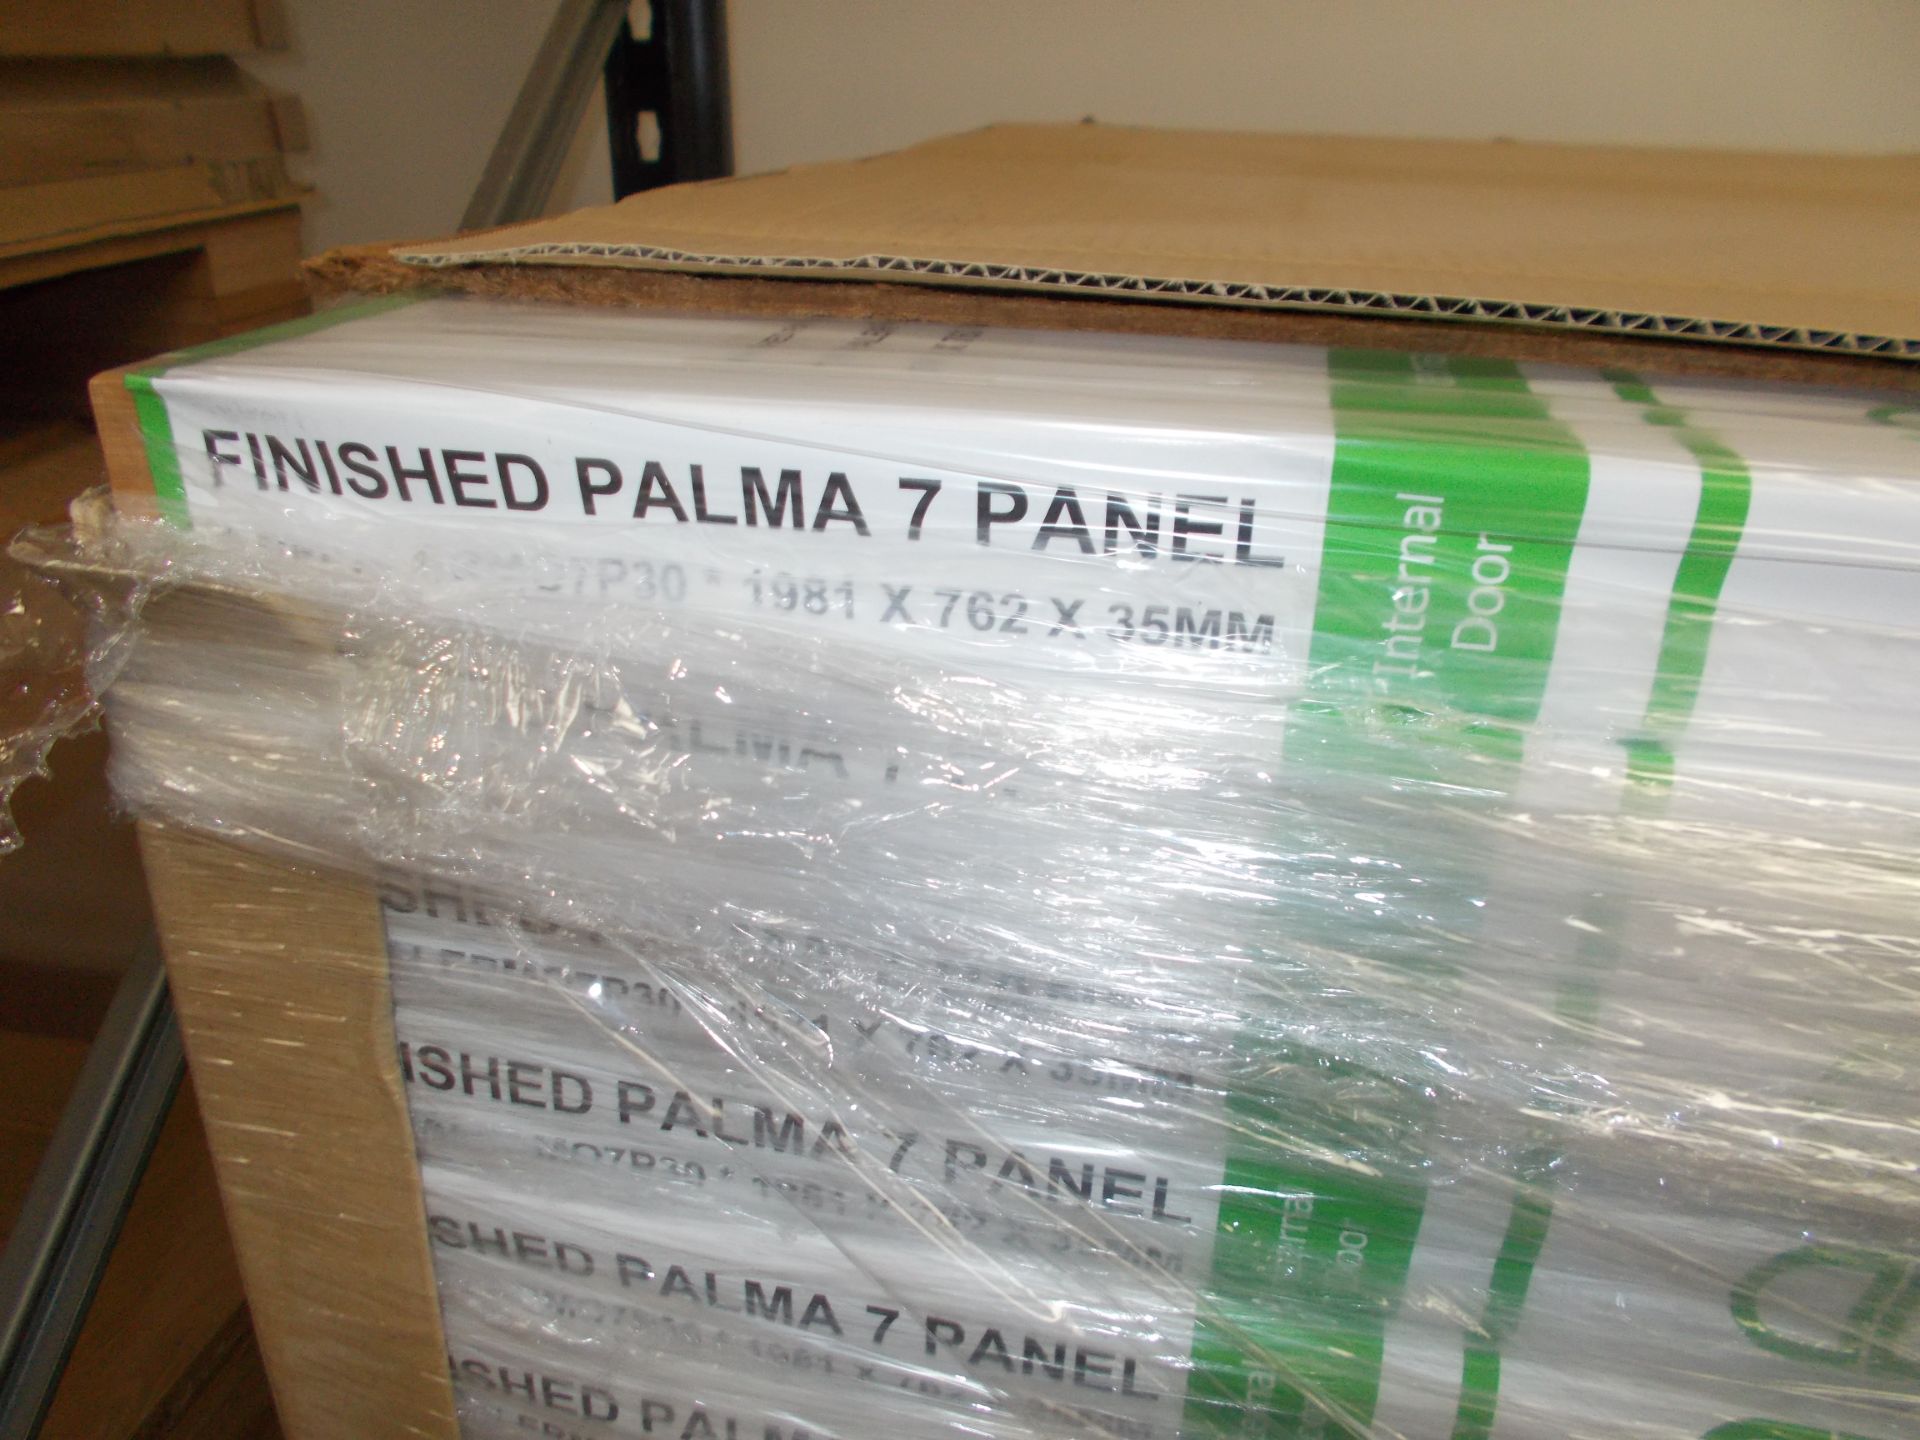 7 x Finished Palma 7 Panel Internal Door PFPALERMO7P30 1981x762x35mm - Lots to be handed out in - Image 3 of 3